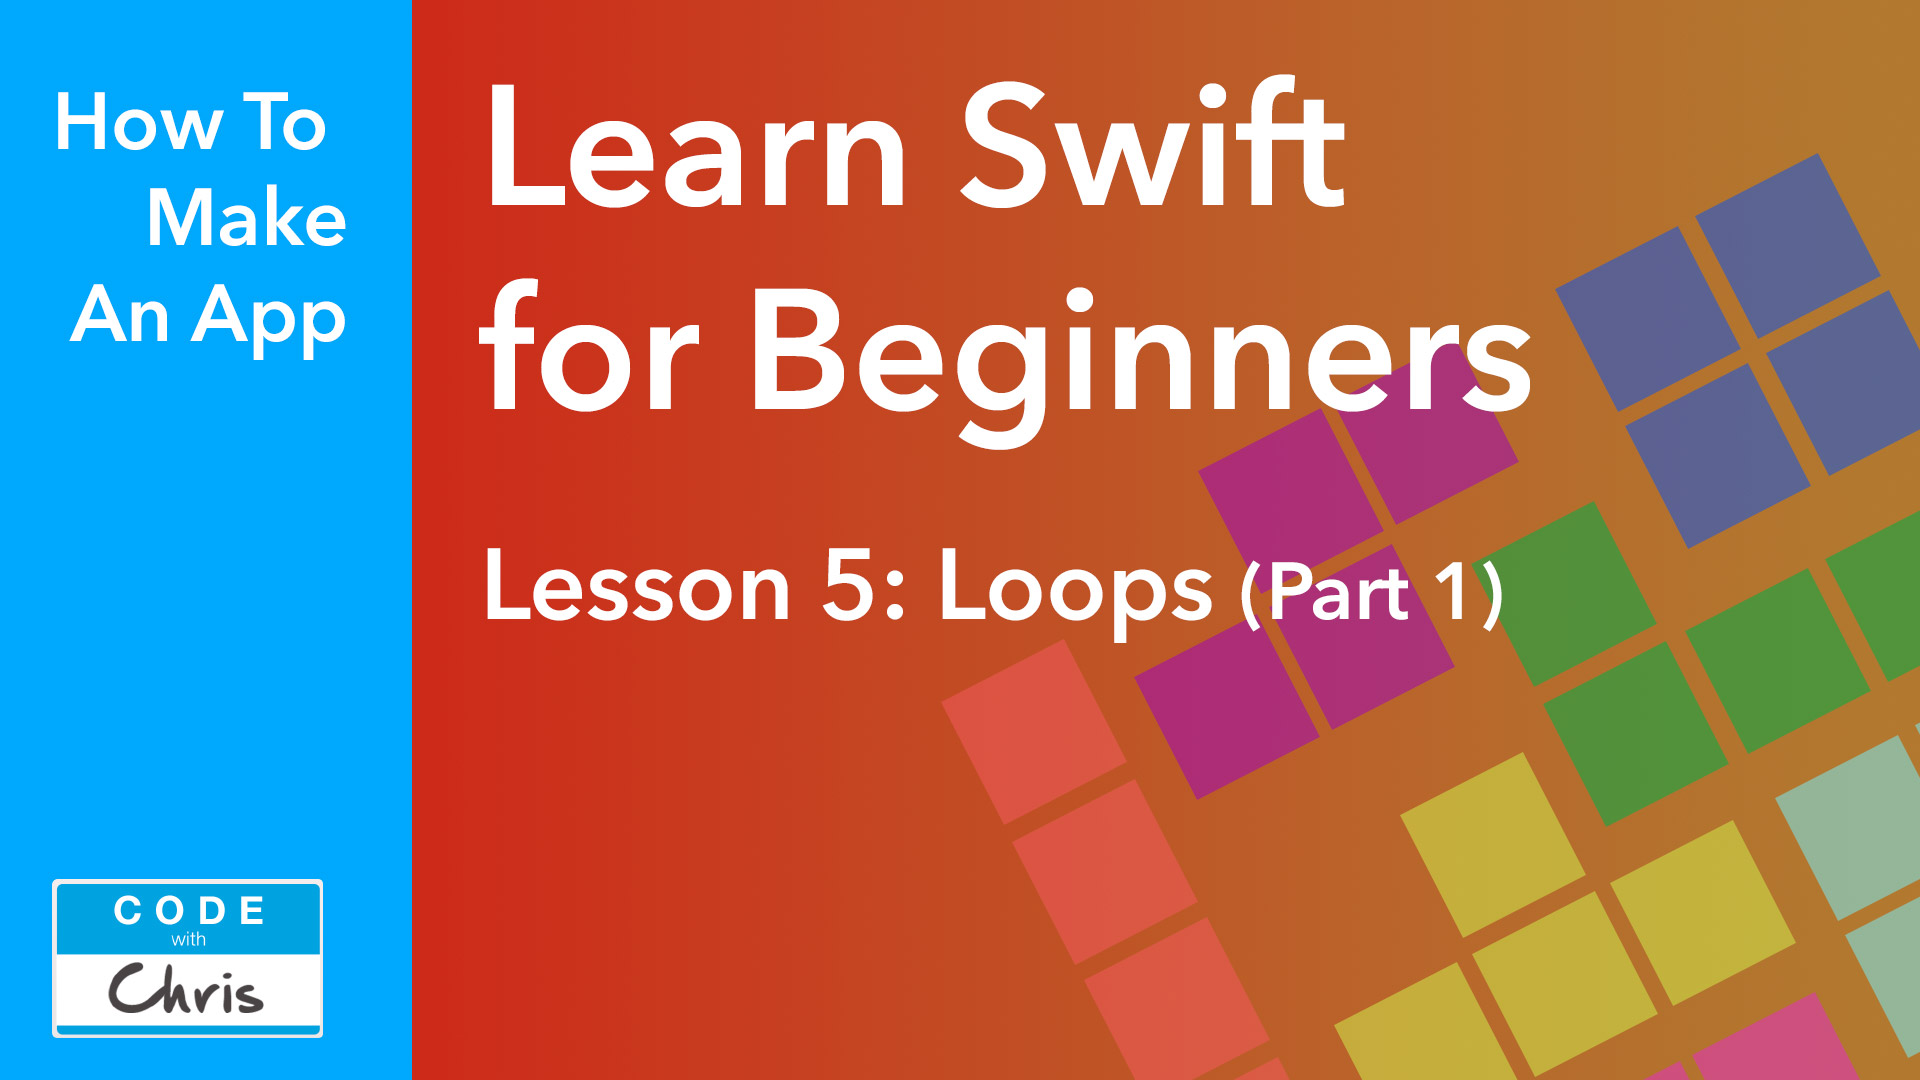 Lesson 5 Loops